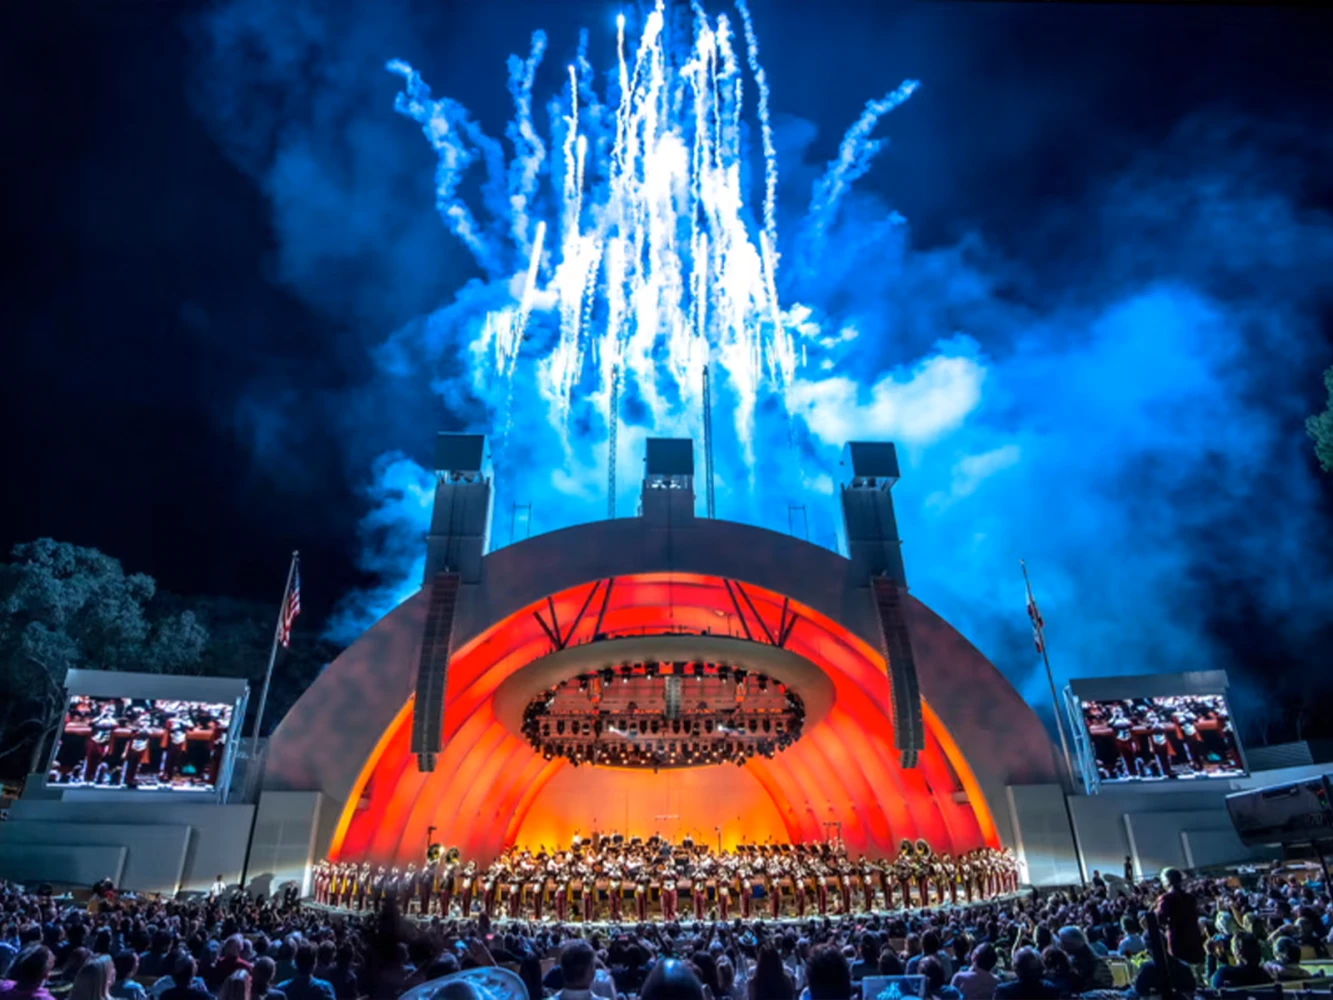 Tchaikovsky Spectacular with Fireworks: What to expect - 1